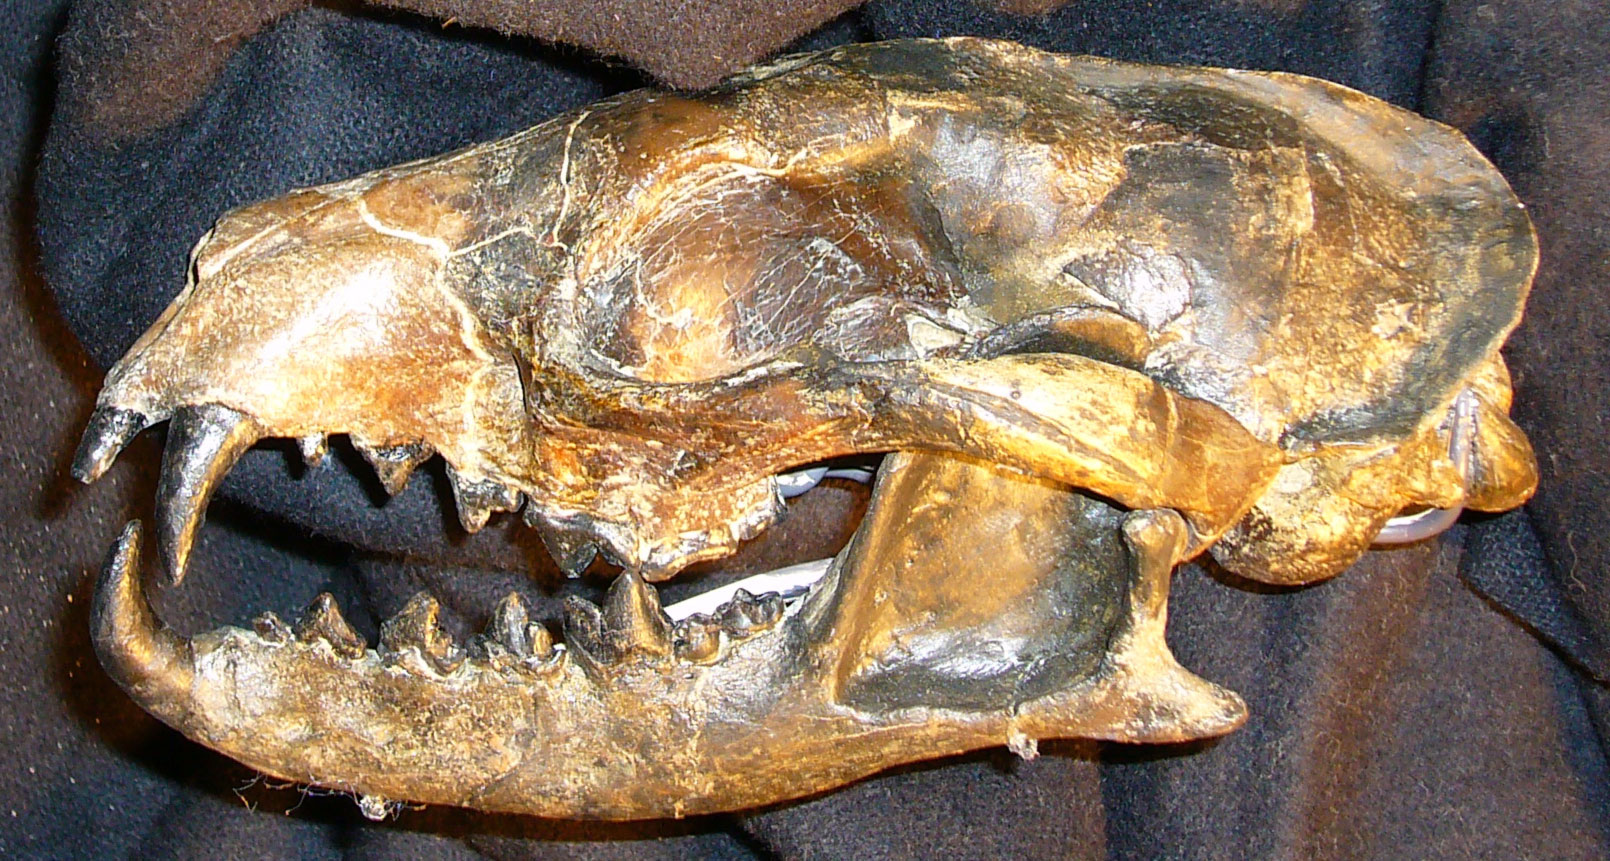 Photograph of the skull of the fossil canid Mesocyon from the Oligocene of Oregon. The skull is shown in the side and appears complete. The teeth are sharp and the canines relatively long.